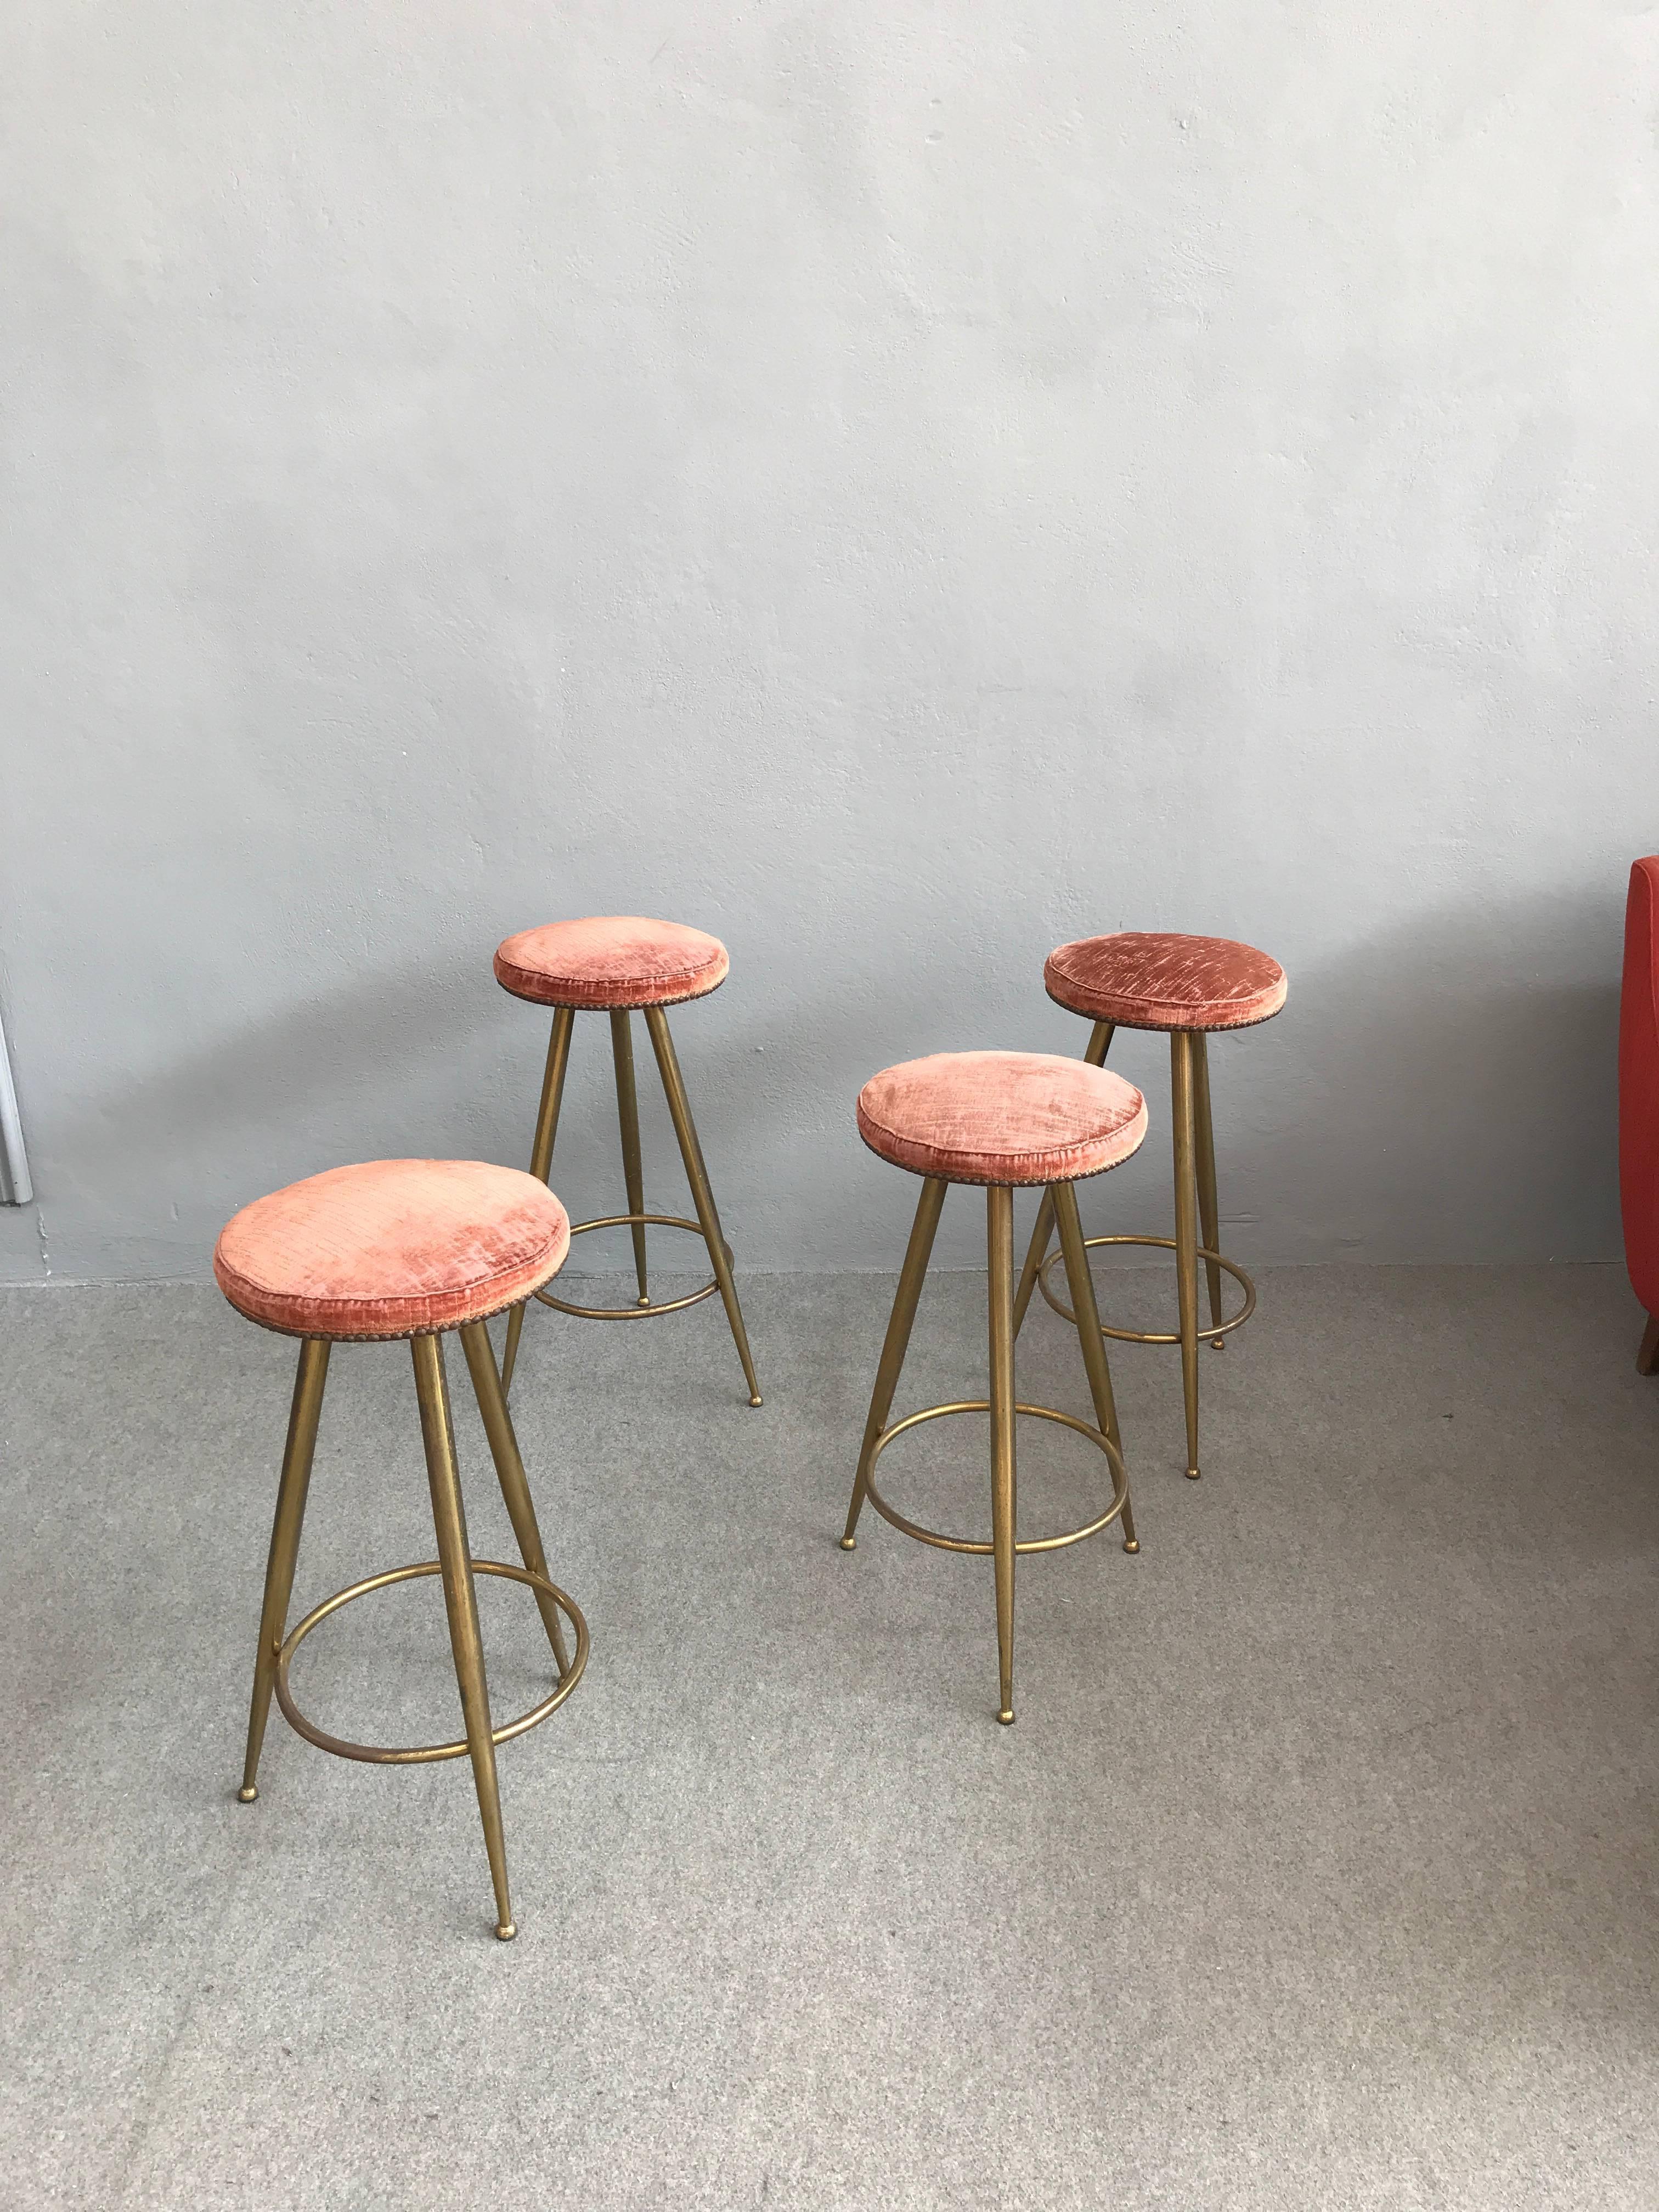 Nice set of four brass stools in the style of Gio Ponti.
Original pink velvet upholstering.